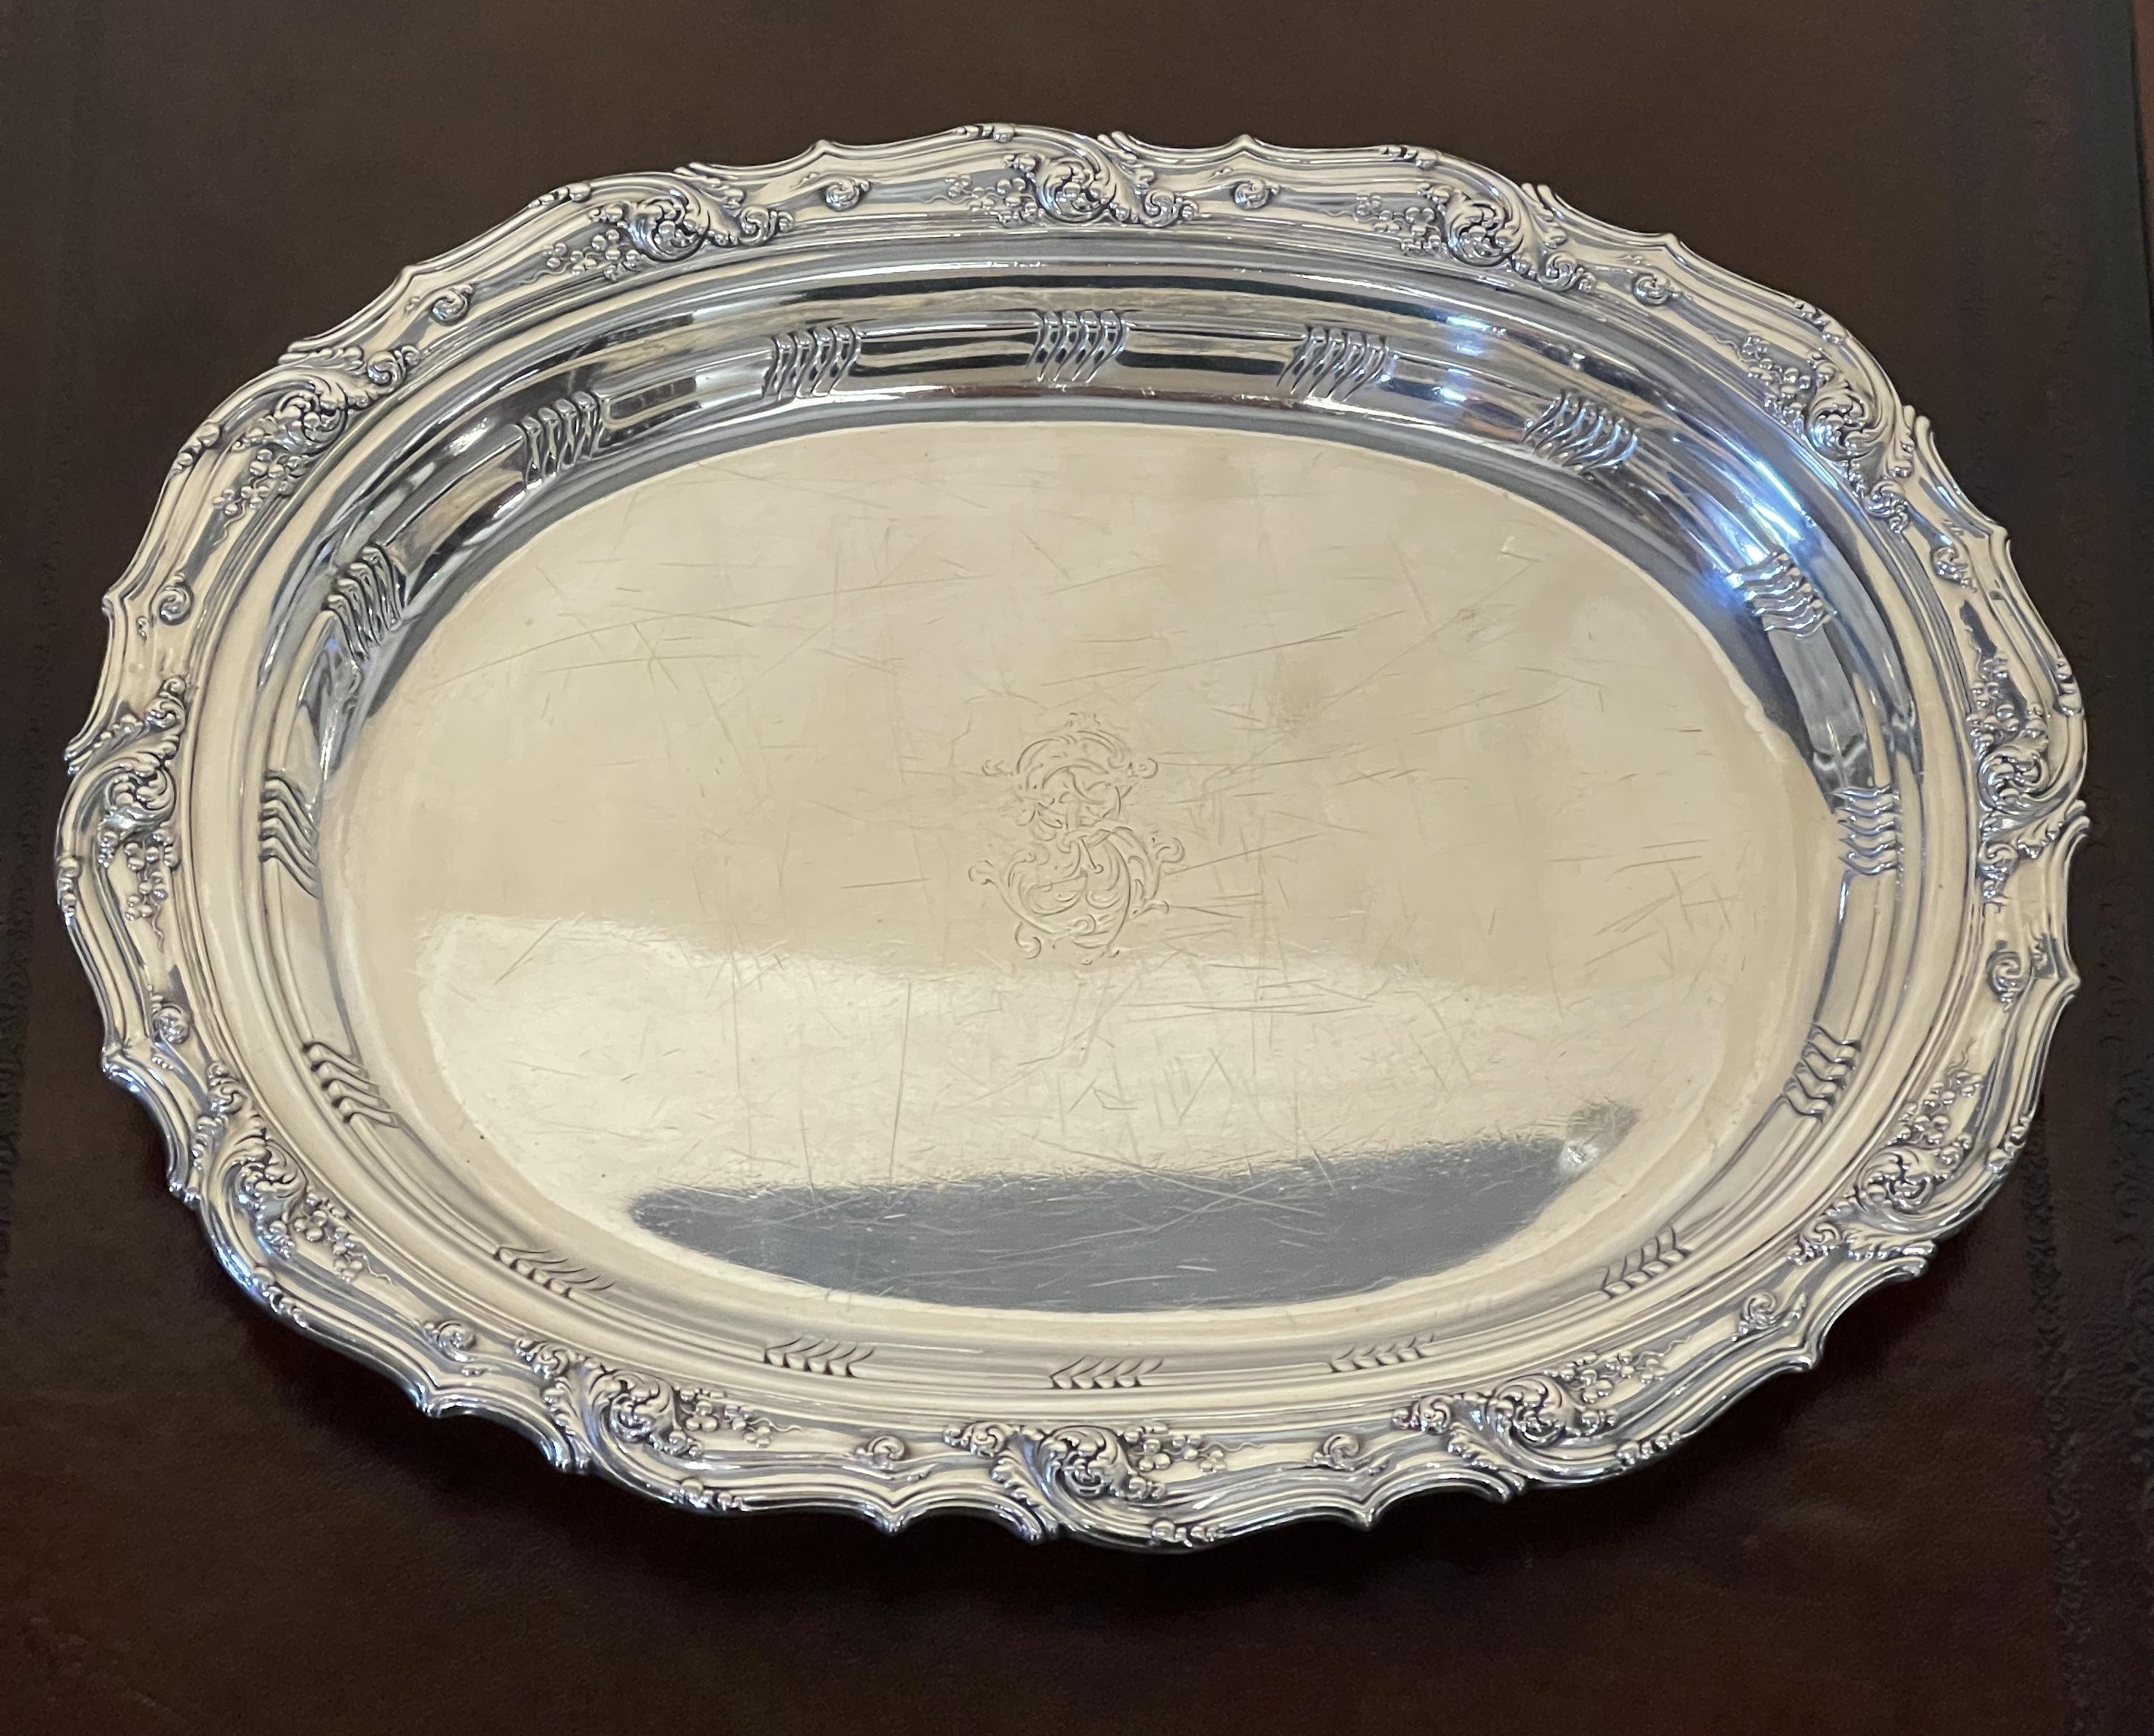 Super Collectable World Fair Chicago 1893 Antique Tiffany & Co. Sterling Tray For Sale 2